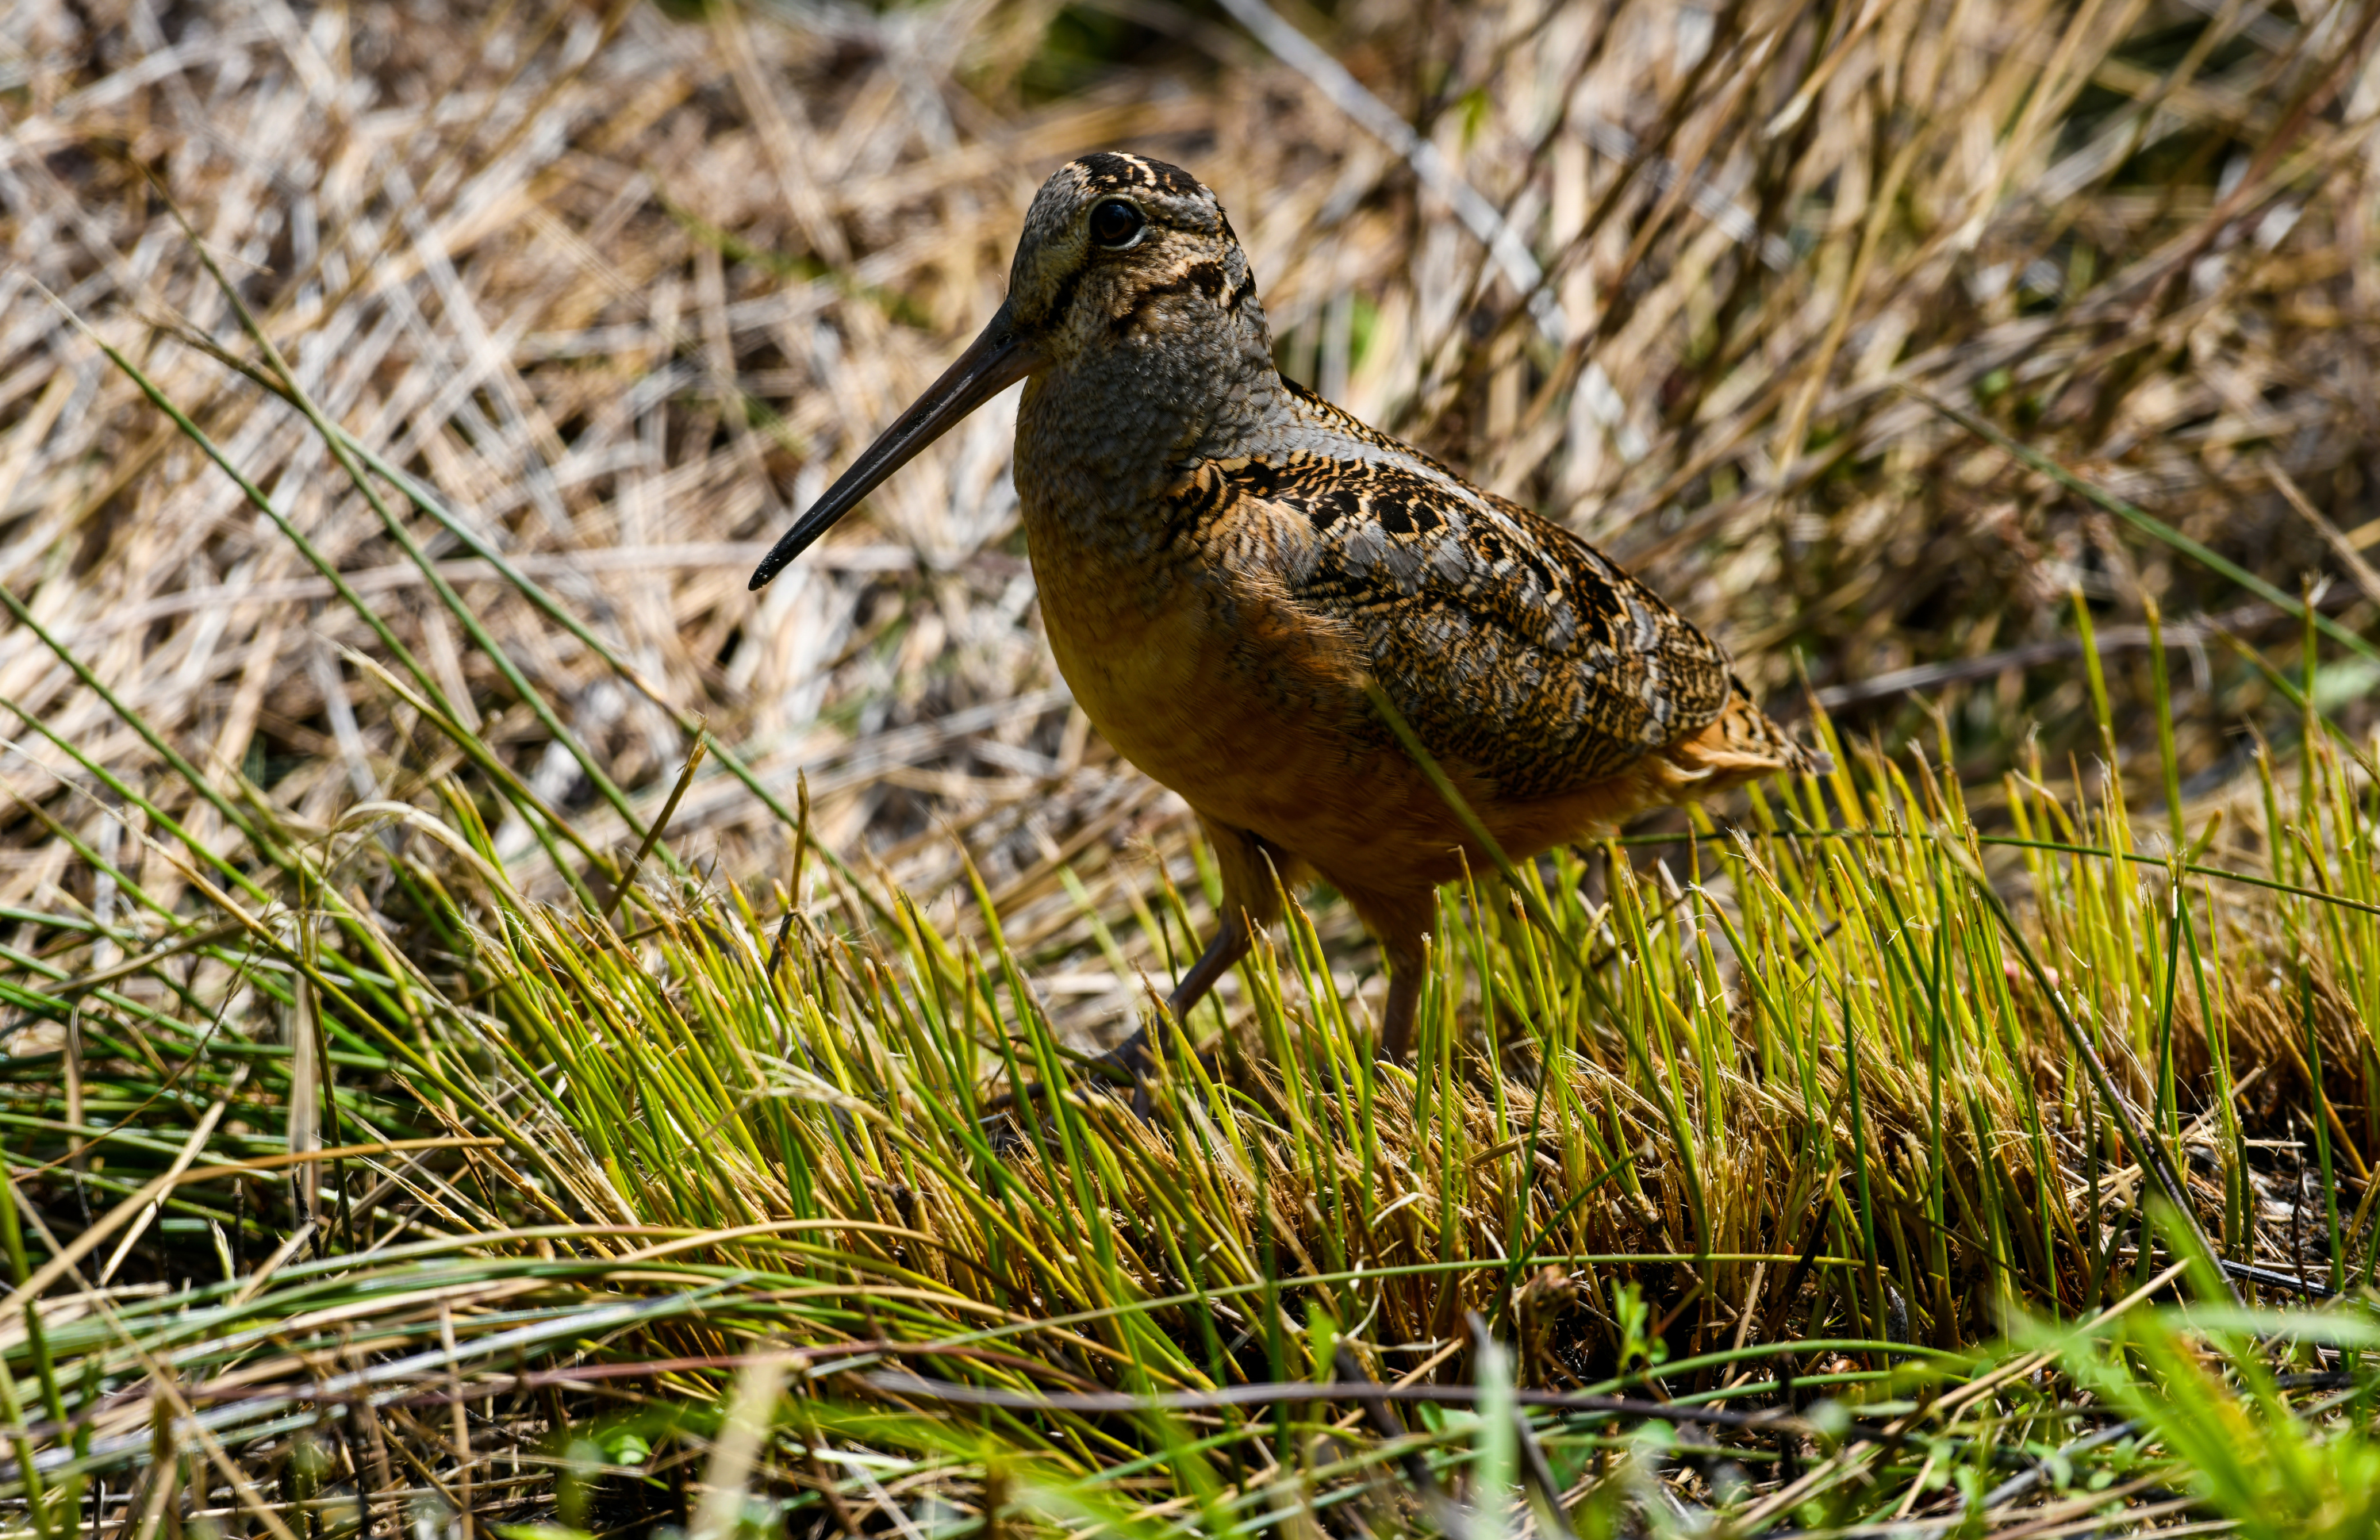 A bird, known as the Woodcock, stands in a fresh patch of grass.